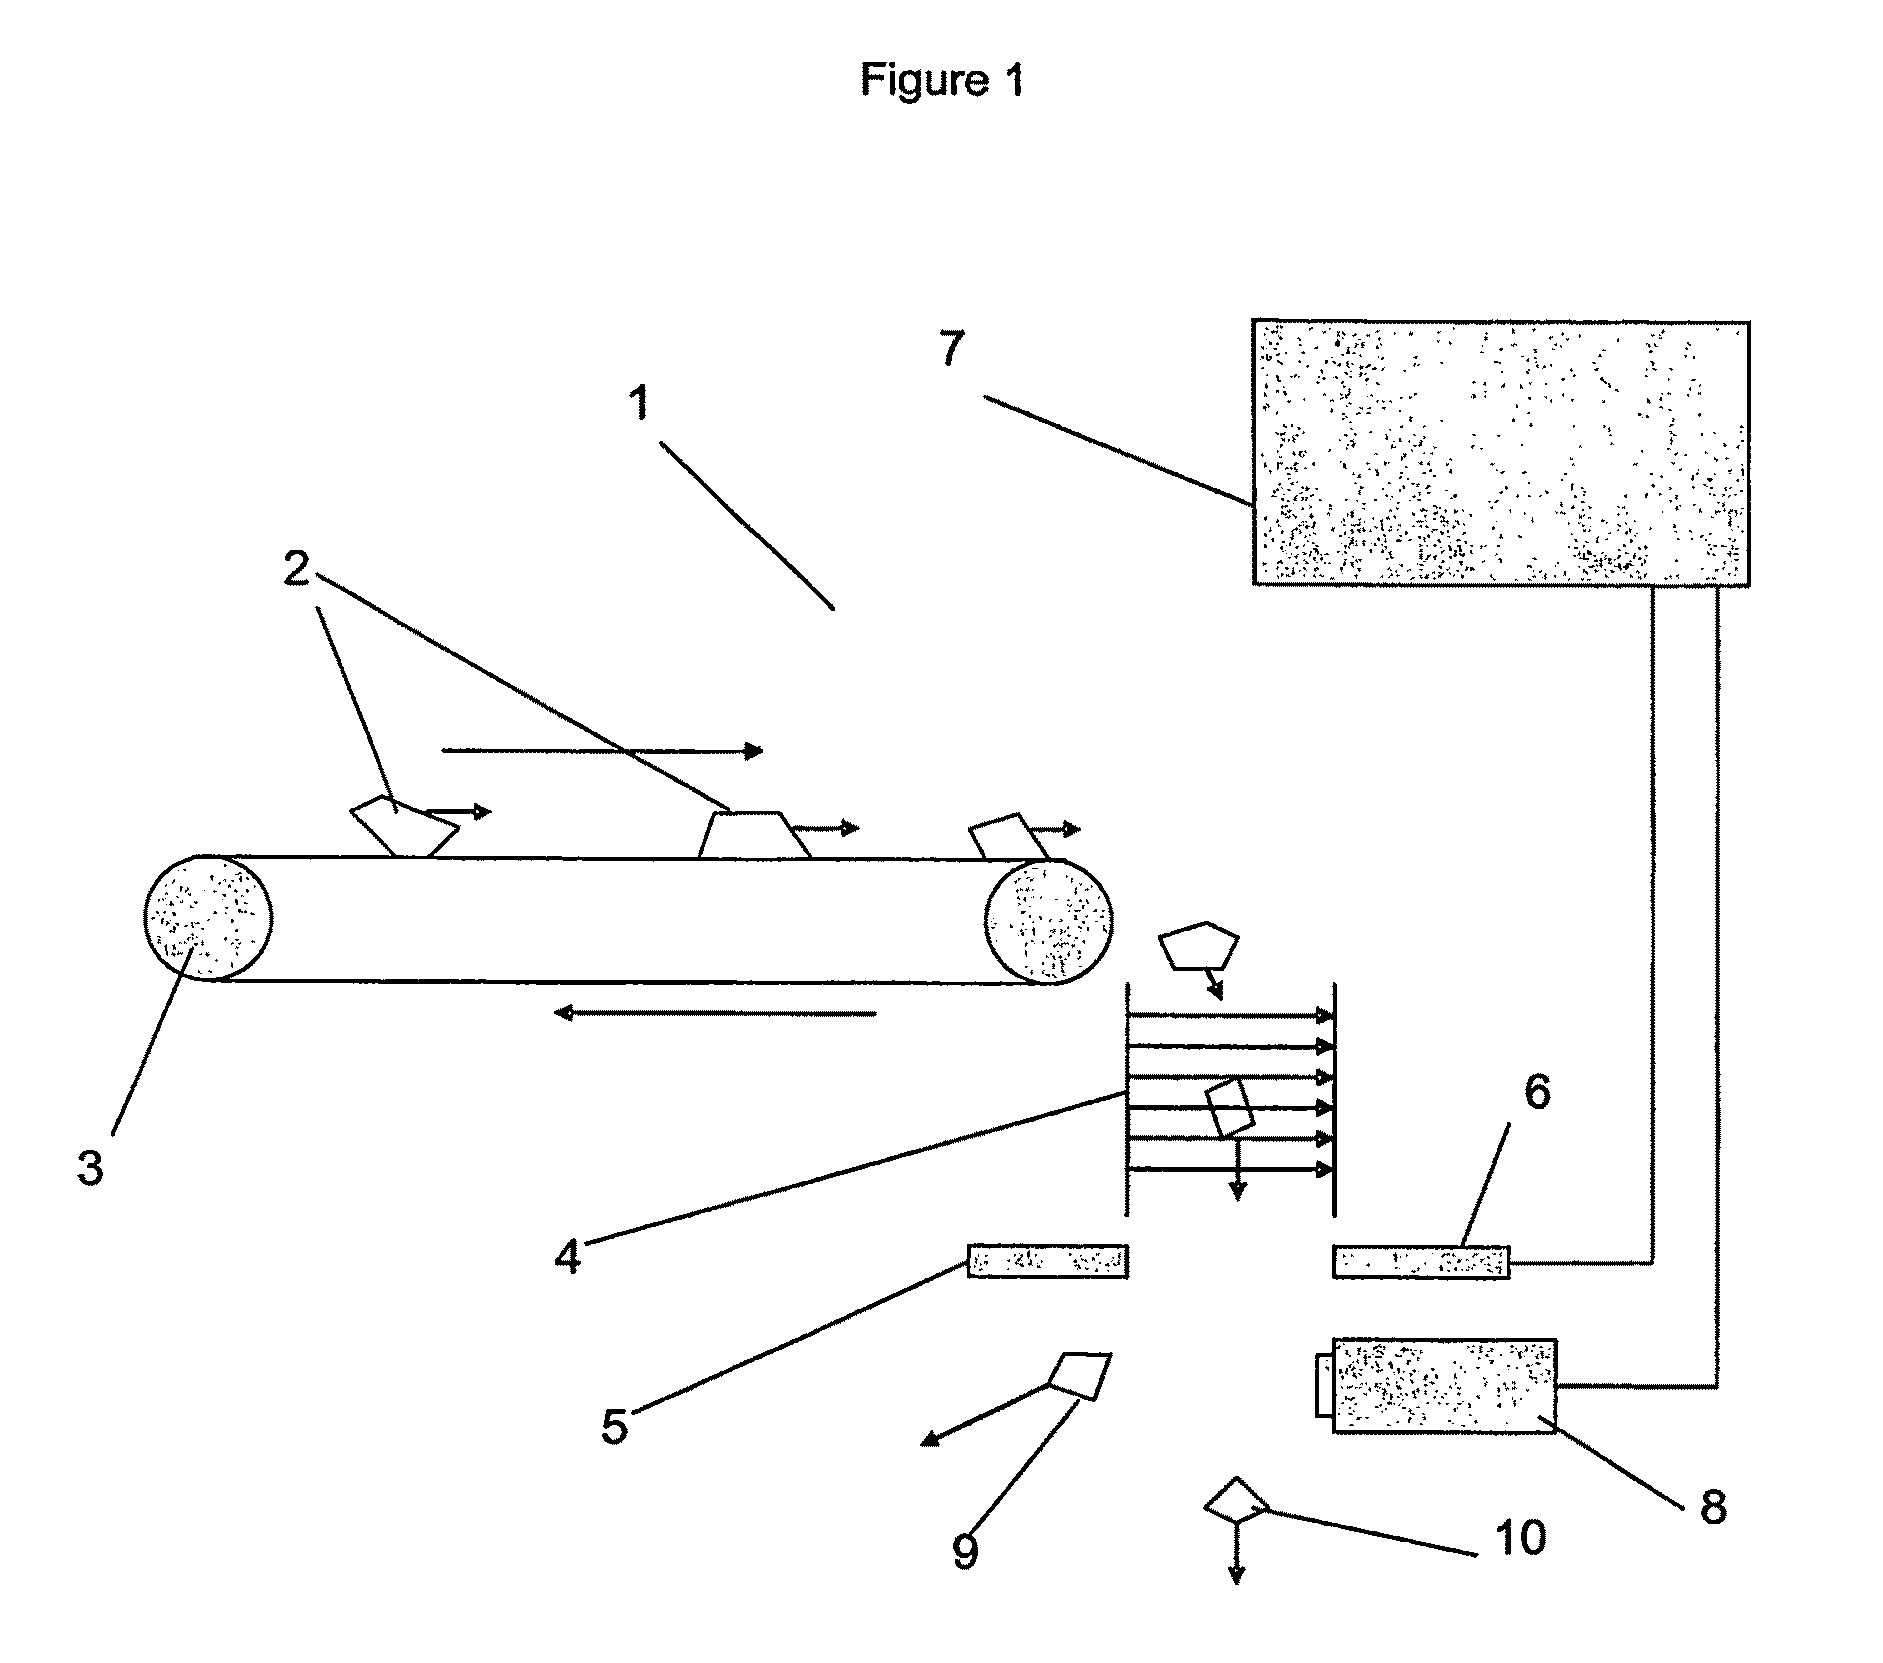 Method of determining the presence of a mineral within a material